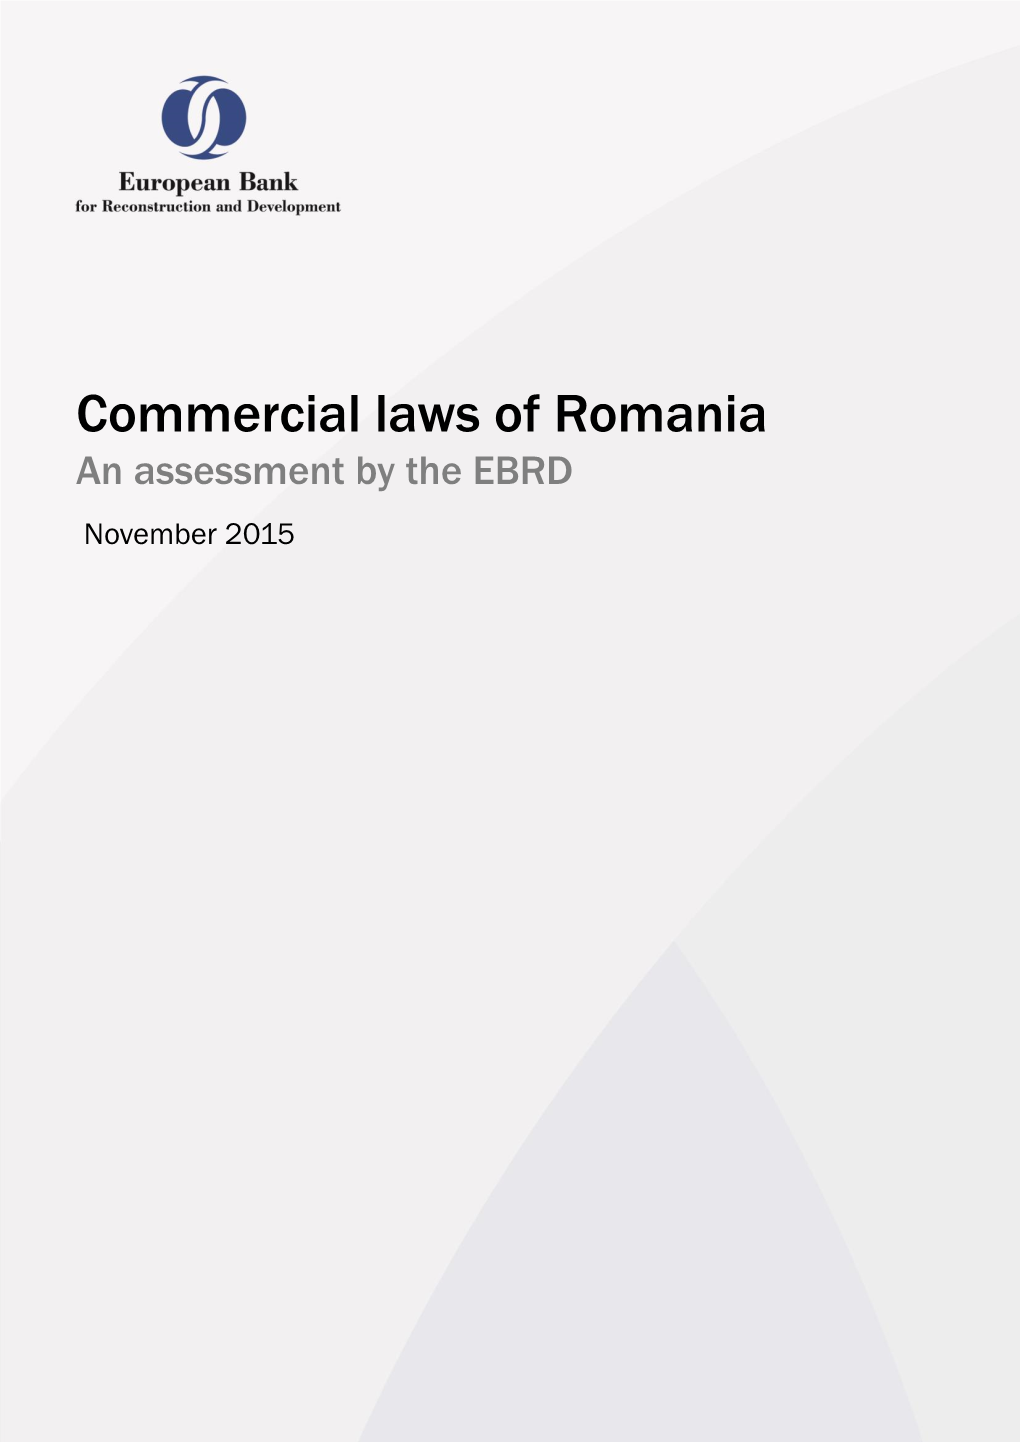 Commercial Laws of Romania an Assessment by the EBRD November 2015 PUBLIC COMMERCIAL LAWS of ROMANIA an ASSESSMENT by the EBRD